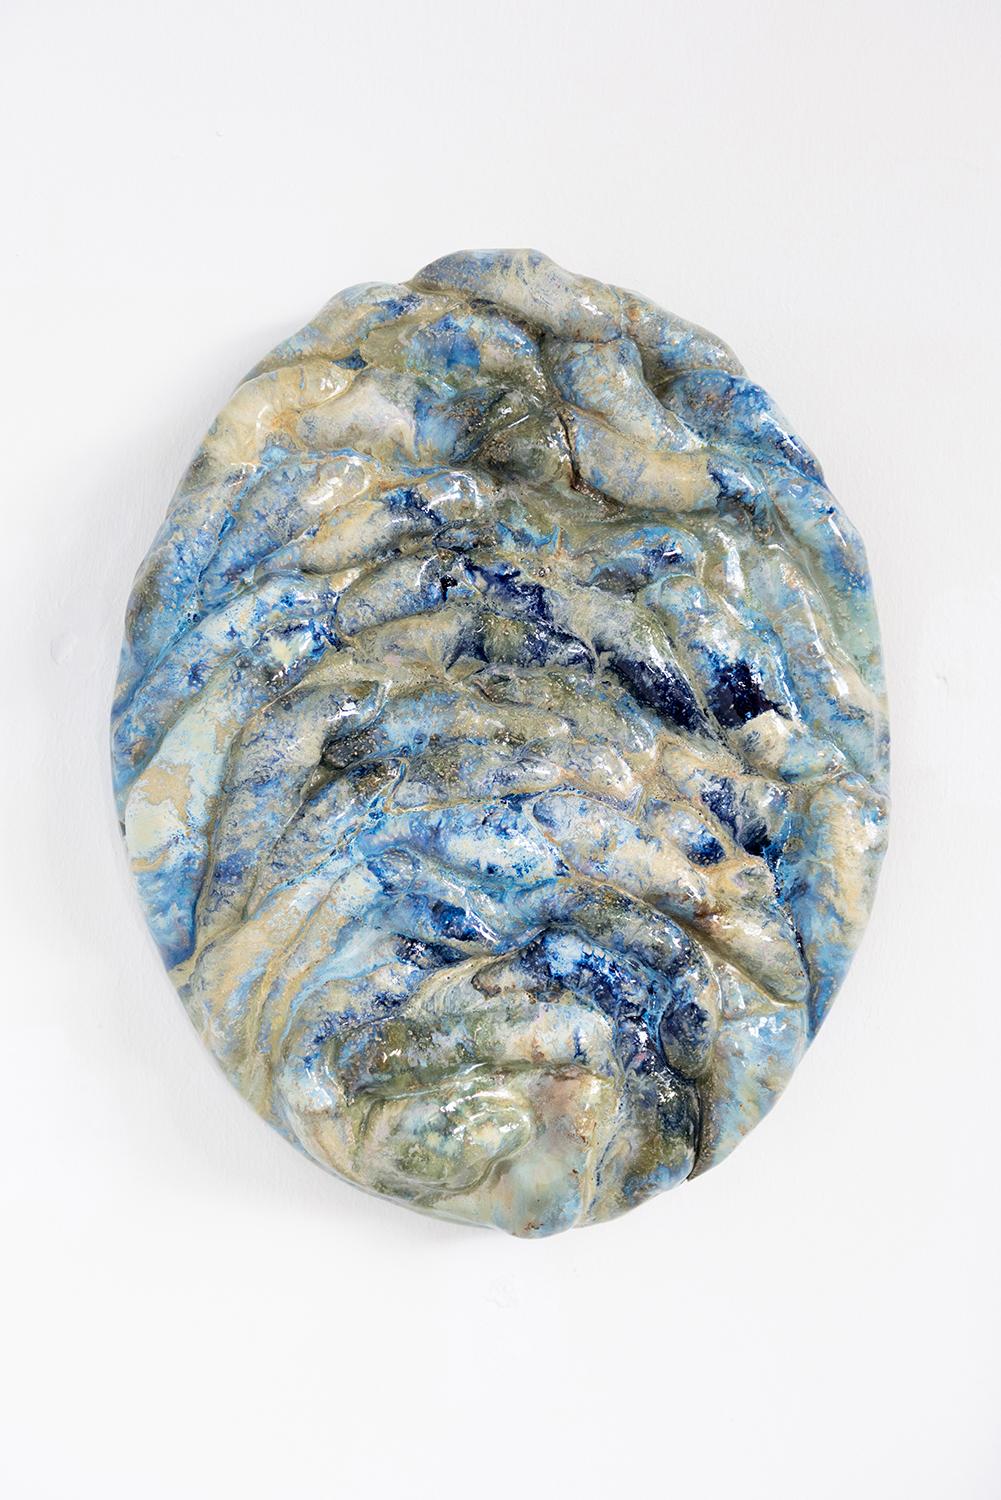 Oval blue wall sculpture by Natasja Alers, 2022
Dimensions: 40 x 7 x 30 cm
Material: ceramics

Visual artist Natasja Alers (The Hague, 1987) graduated from the Gerrit Rietveld Academy in the field of ceramics. Alers makes casts of human body